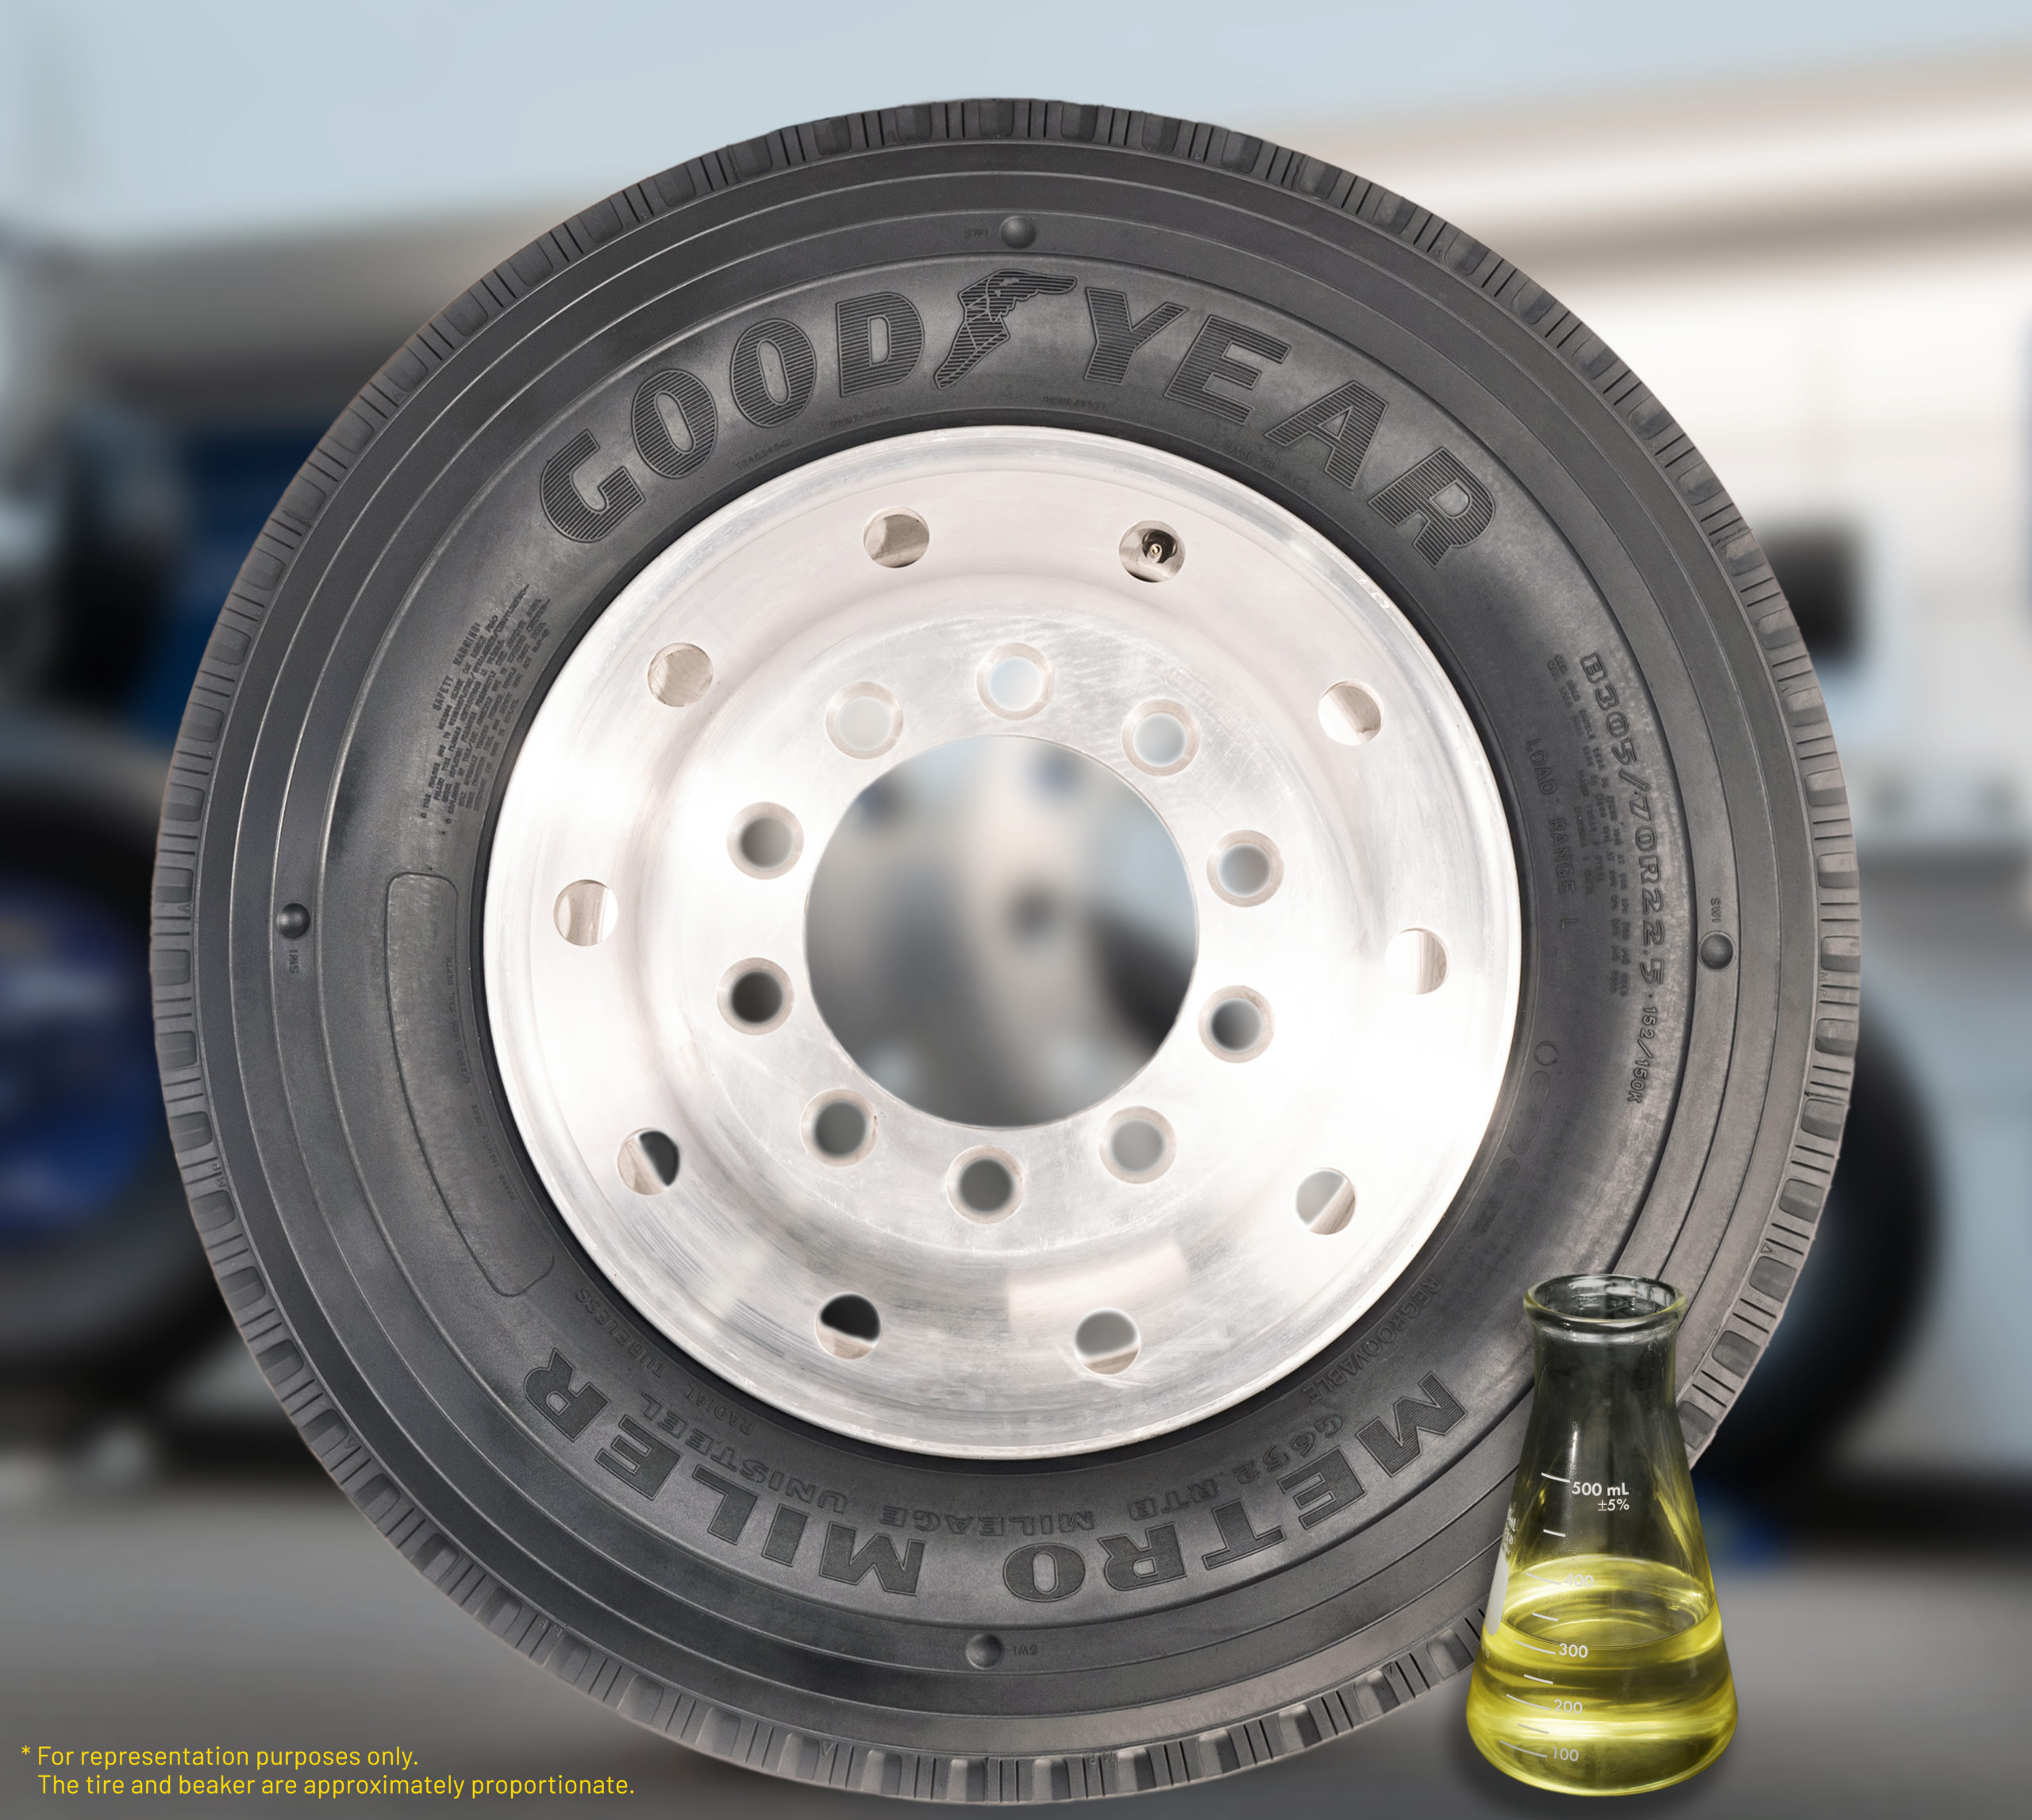 8 Lines of Goodyear Tires Use Soybean Oil in Tread Compound -   : 